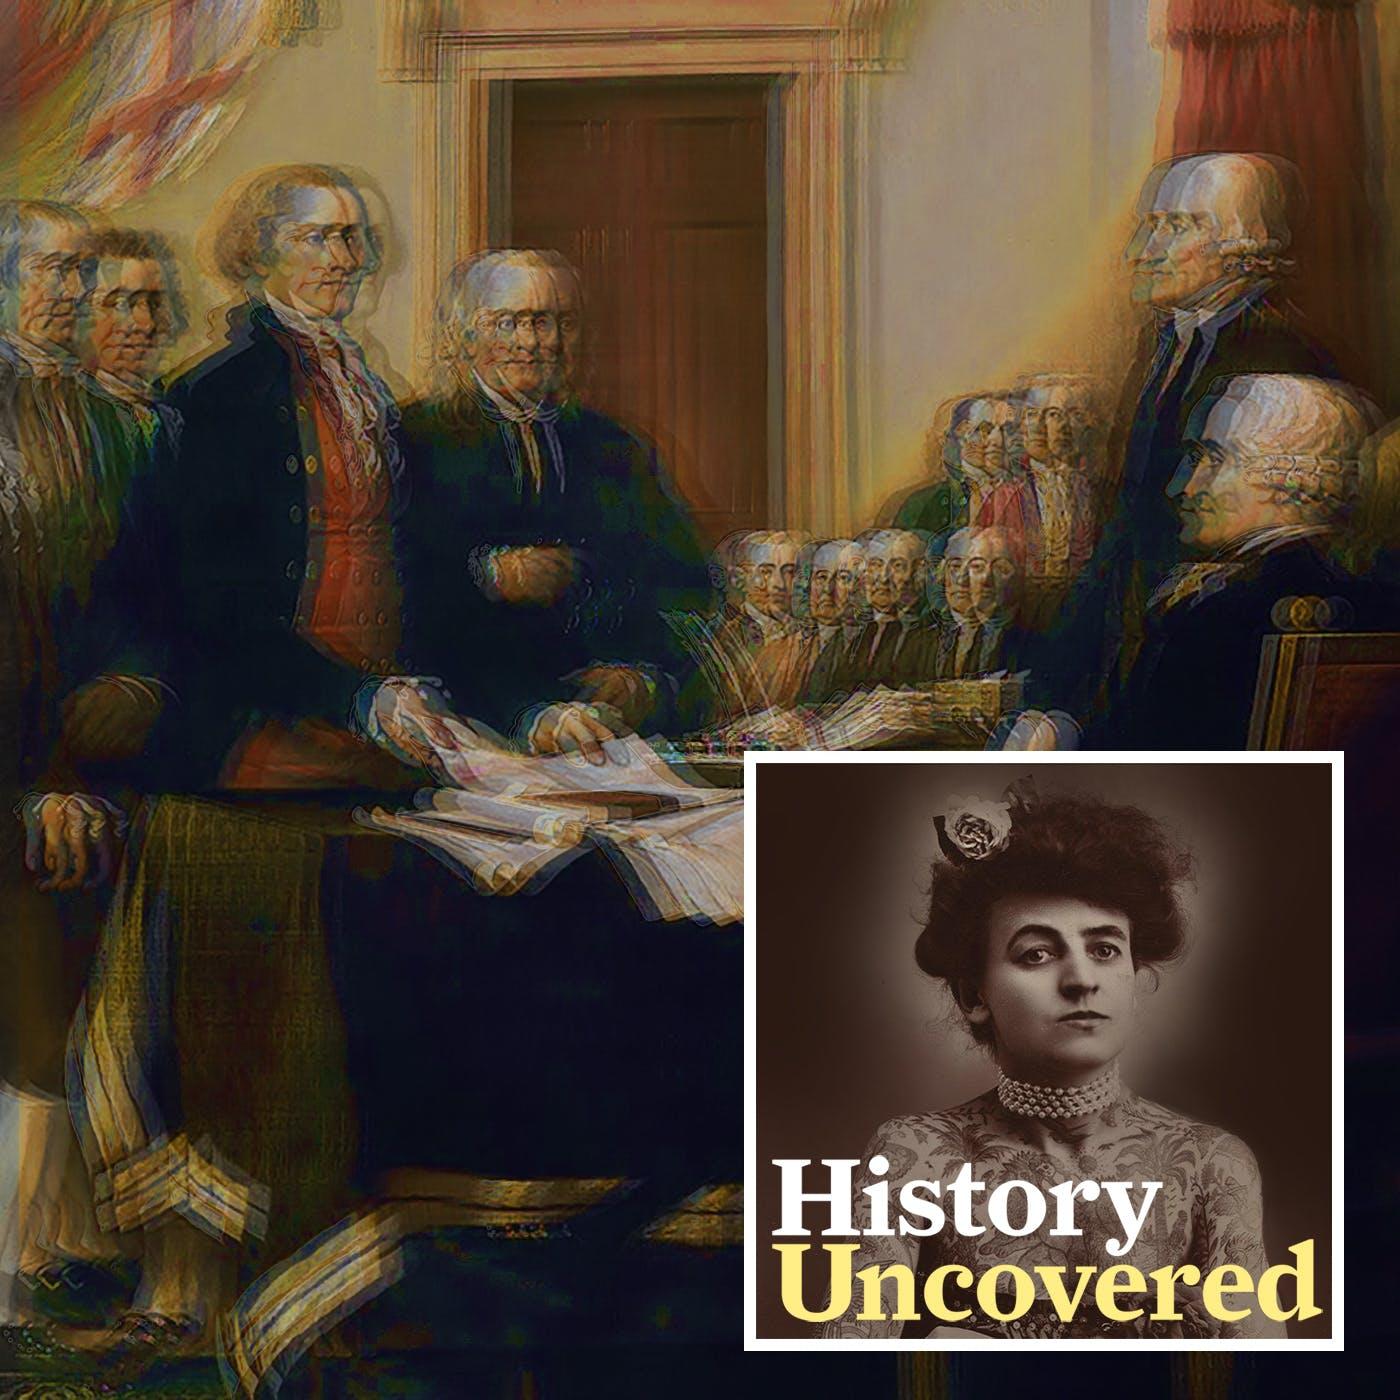 Little-Known Facts About The Founding Fathers